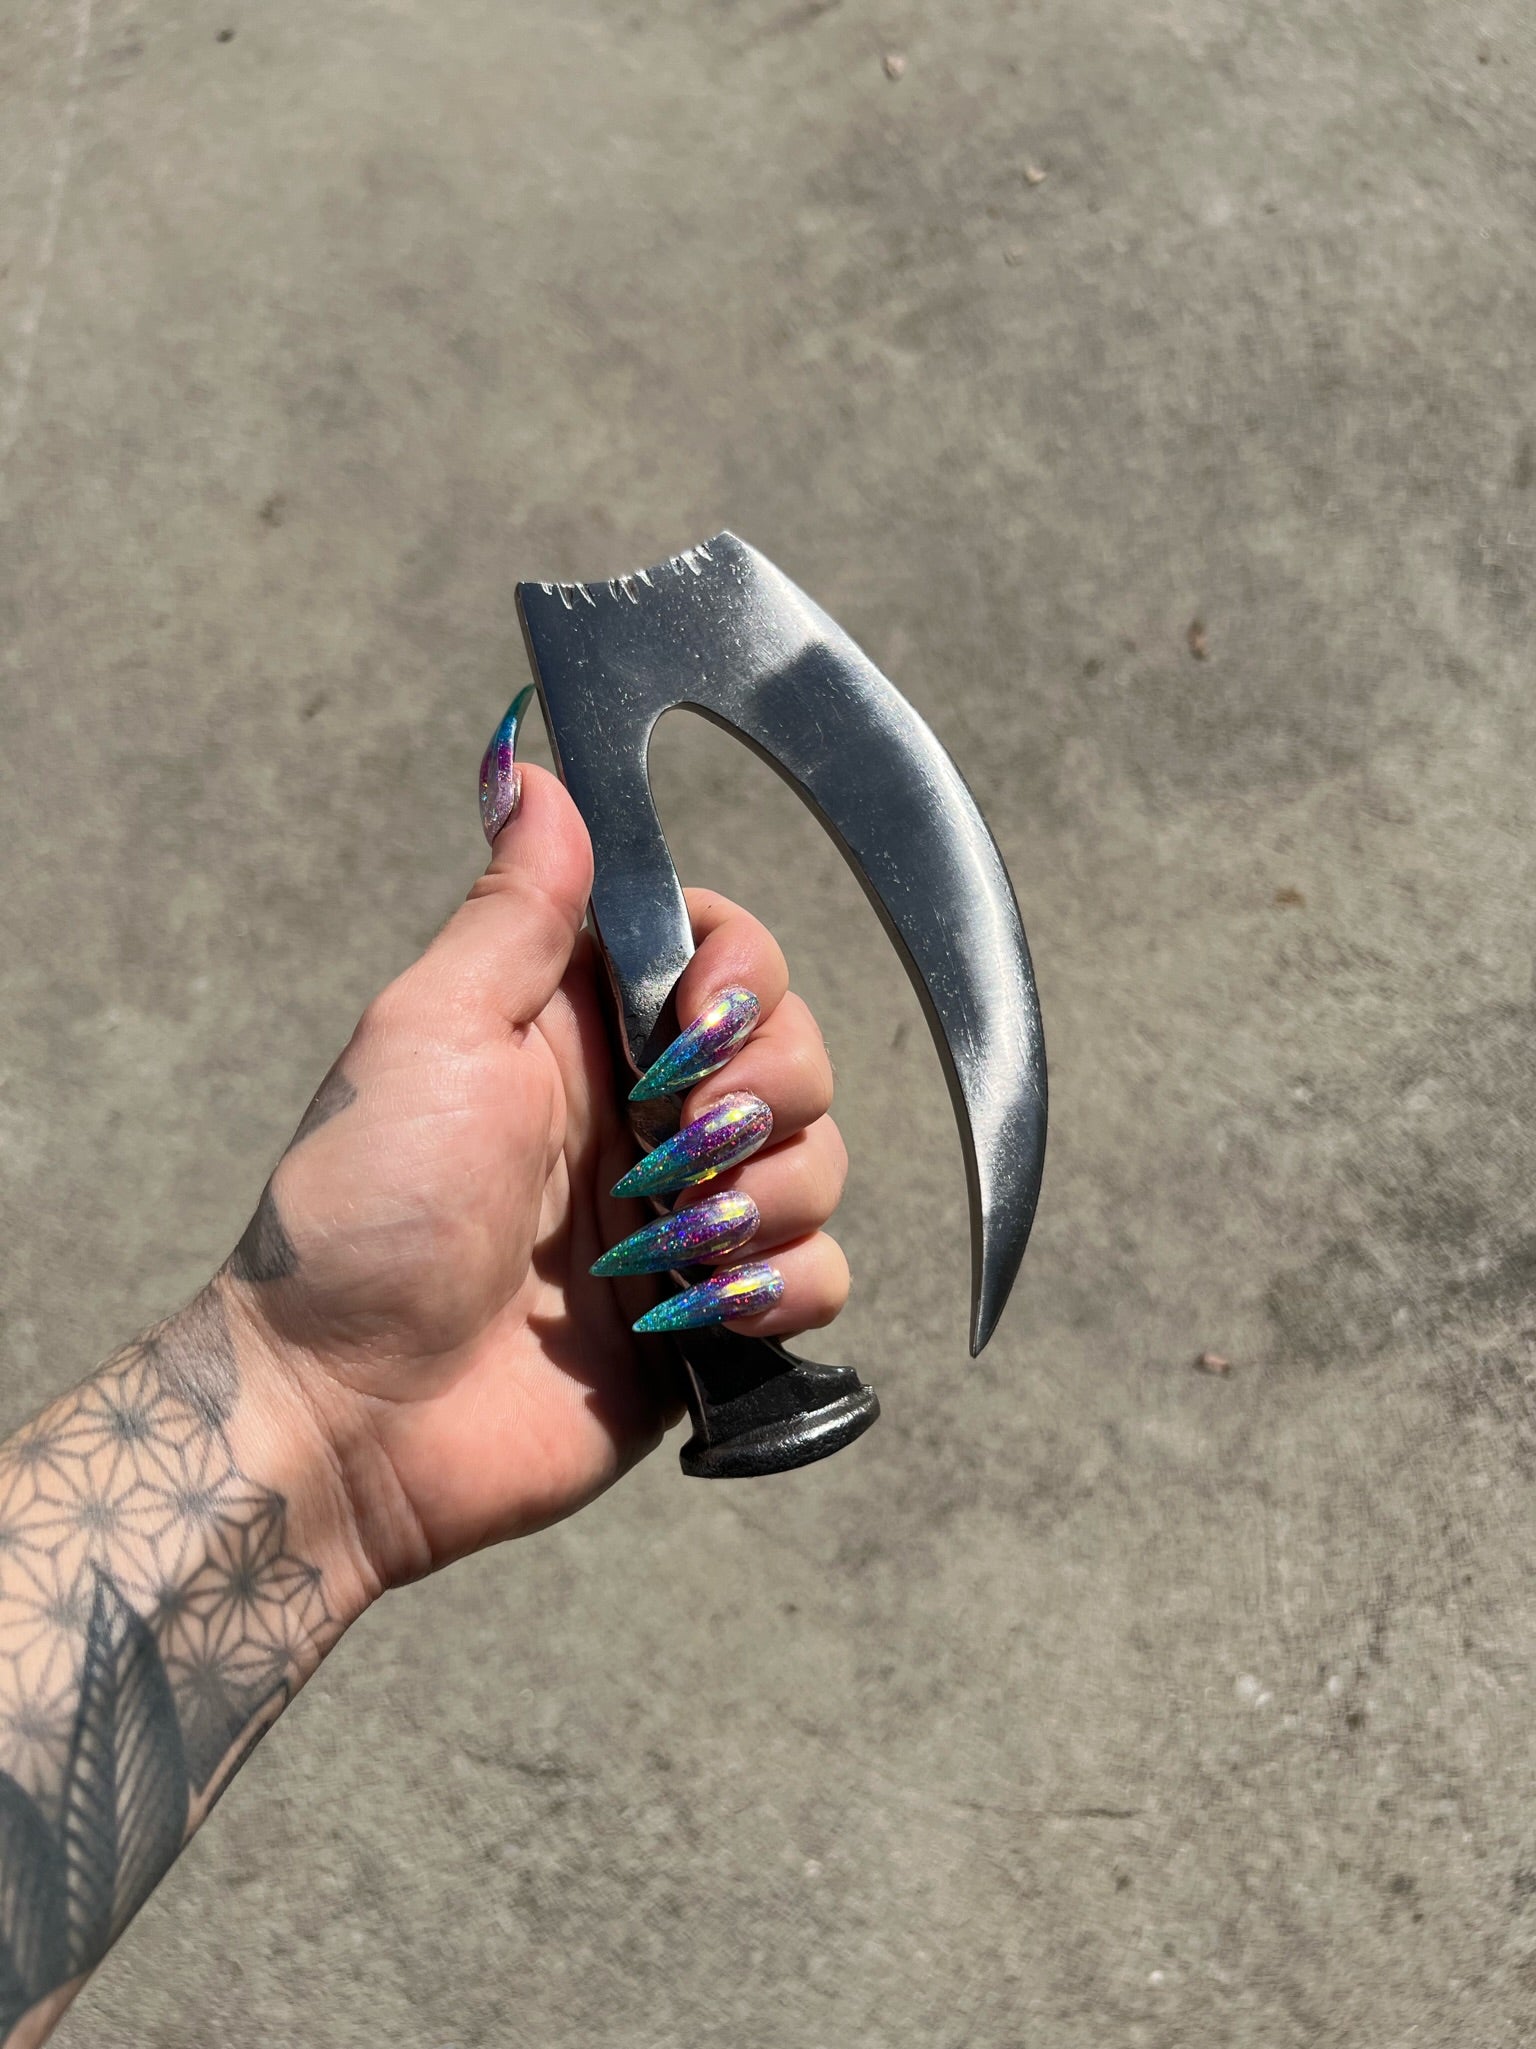 Railroad Karambit Knife - Blades For Babes - Fixed Blade - 3